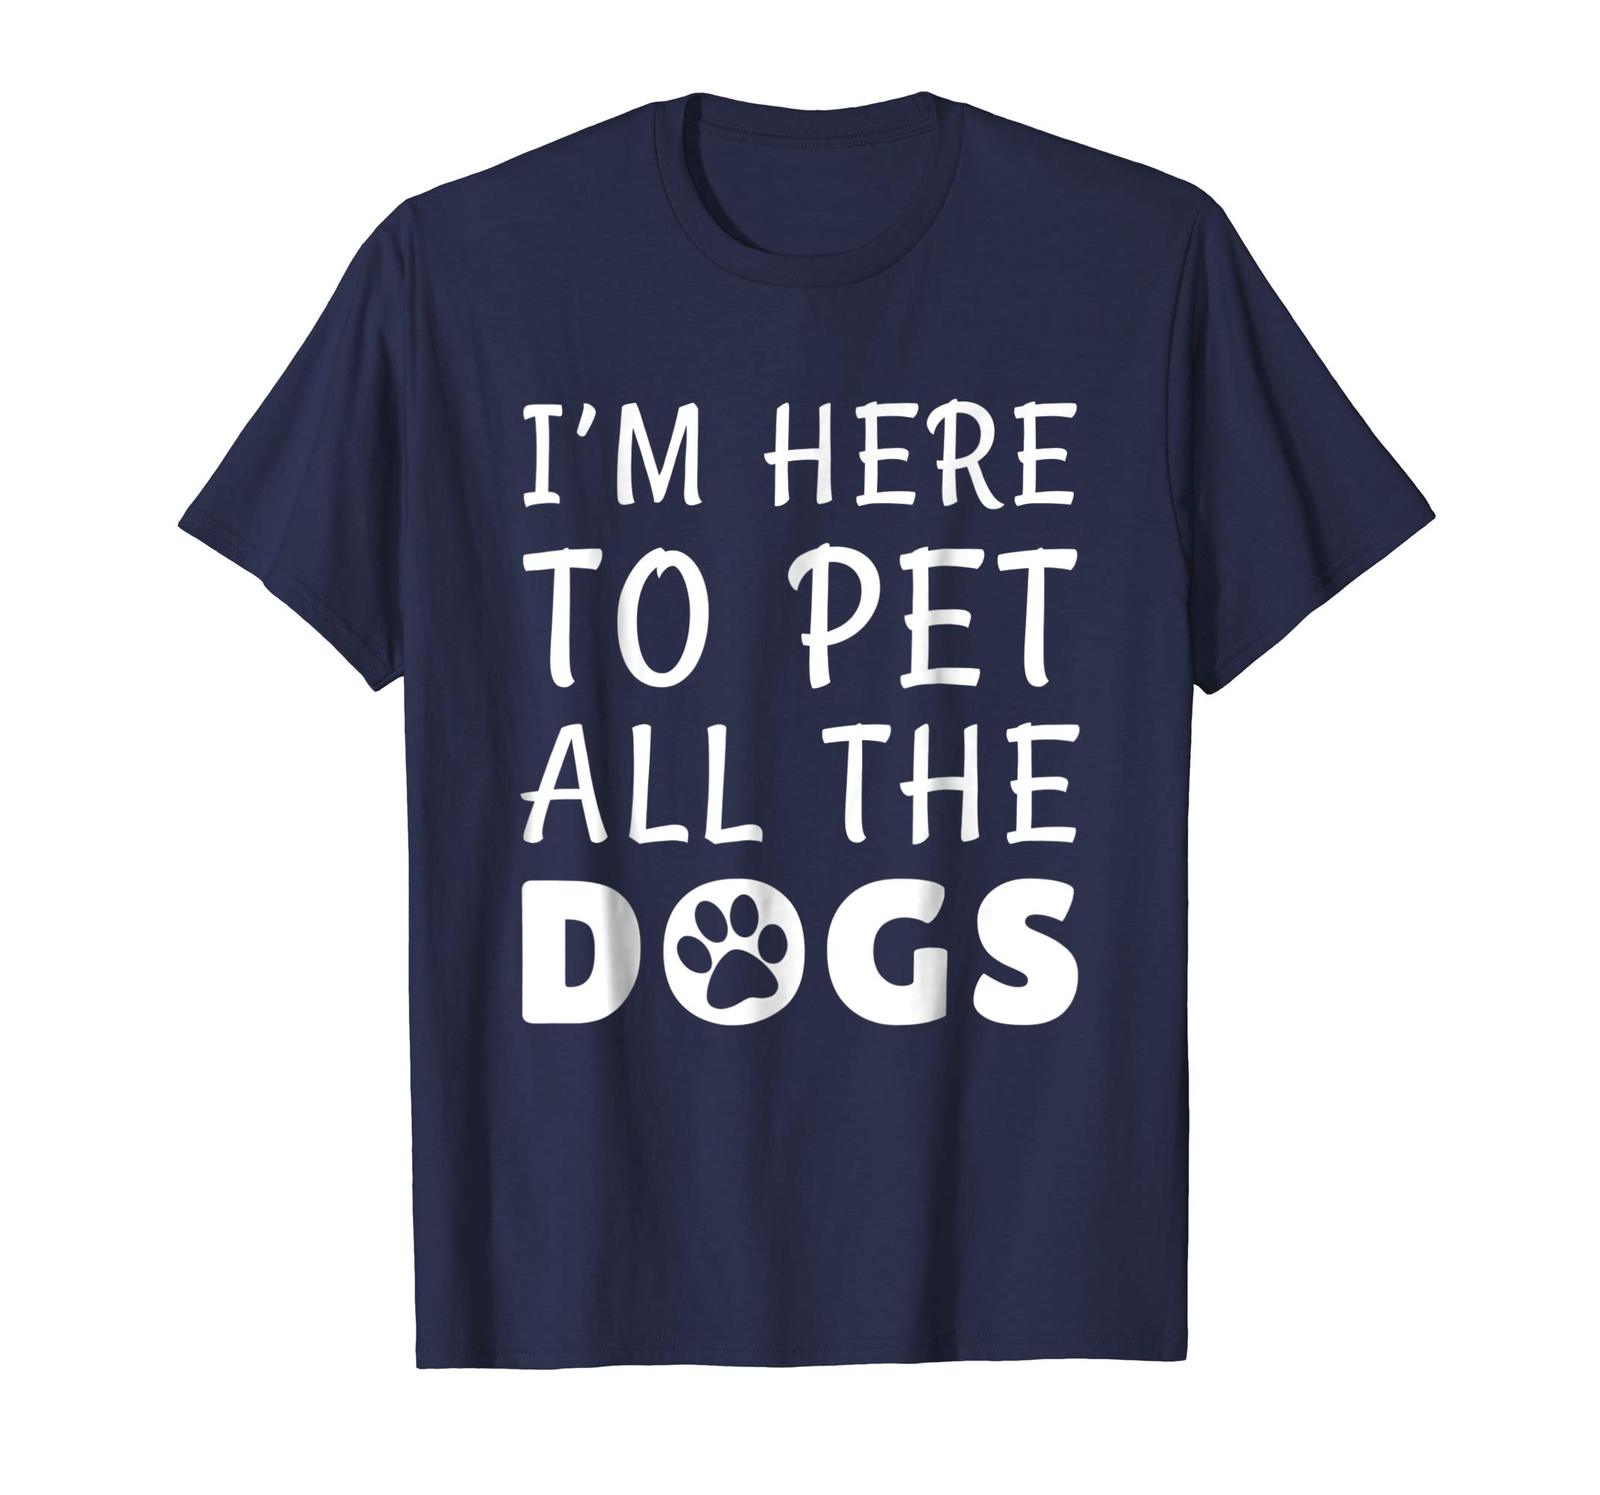 Dog Fashion - I'm Here To Pet All The Dogs Funny Dog Lover T-Shirt Men